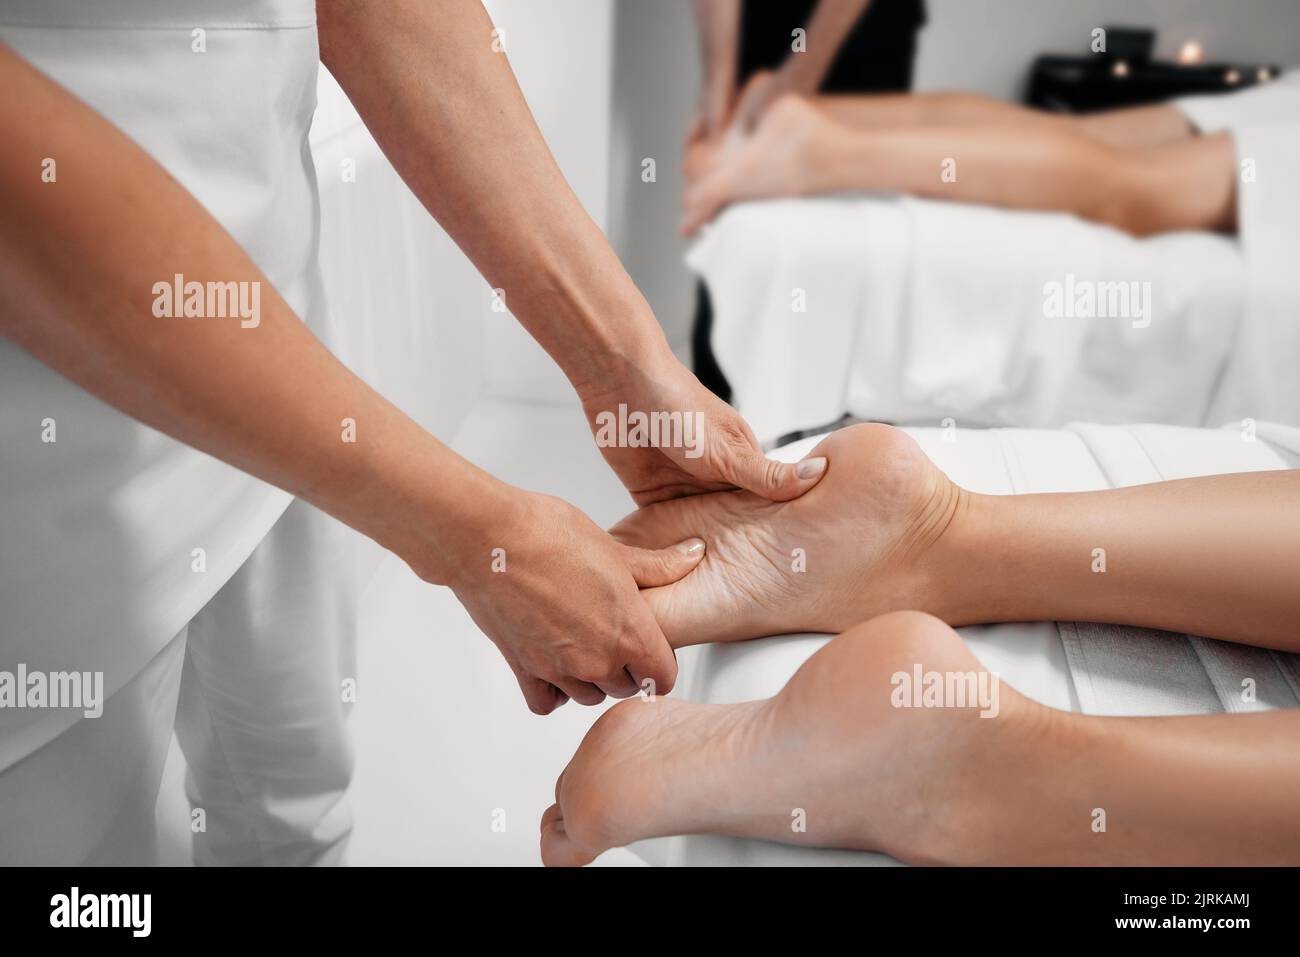 Foot massage with massage oil for female feet while relaxing and resting with her partner at spa while couple massage. Legs massage Stock Photo